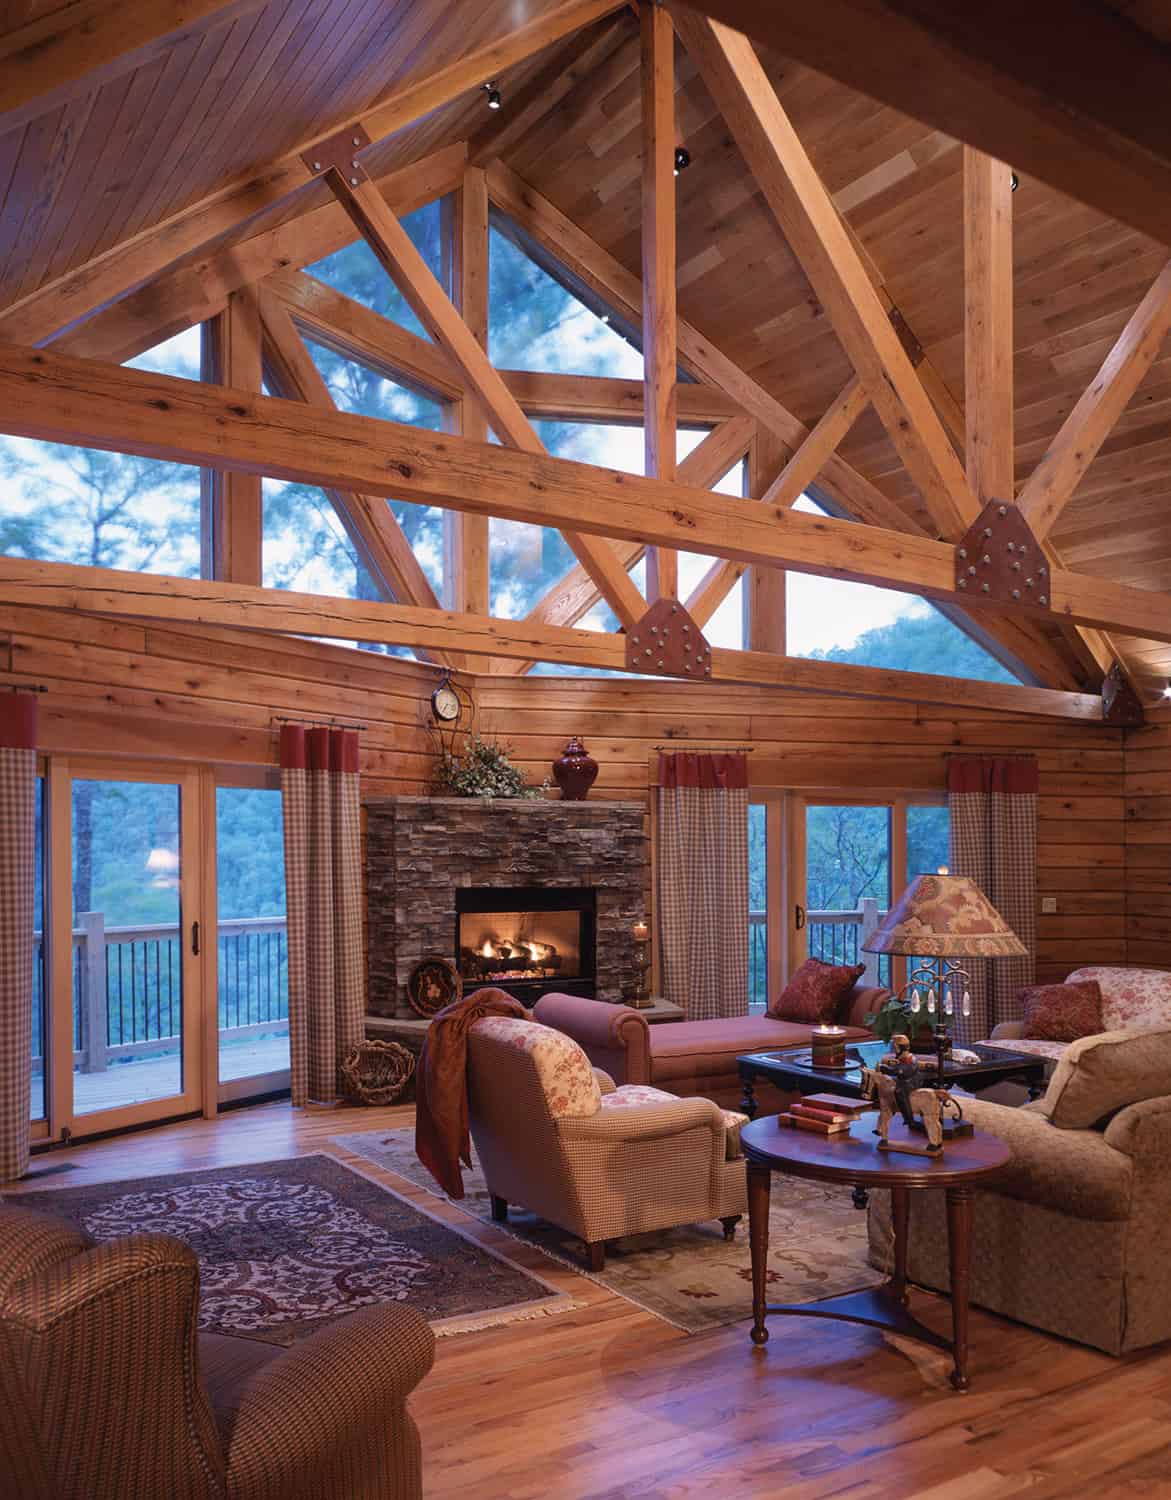 Gastineau Log Homes Updates Consumer Tools For Viewing Home Plans 1